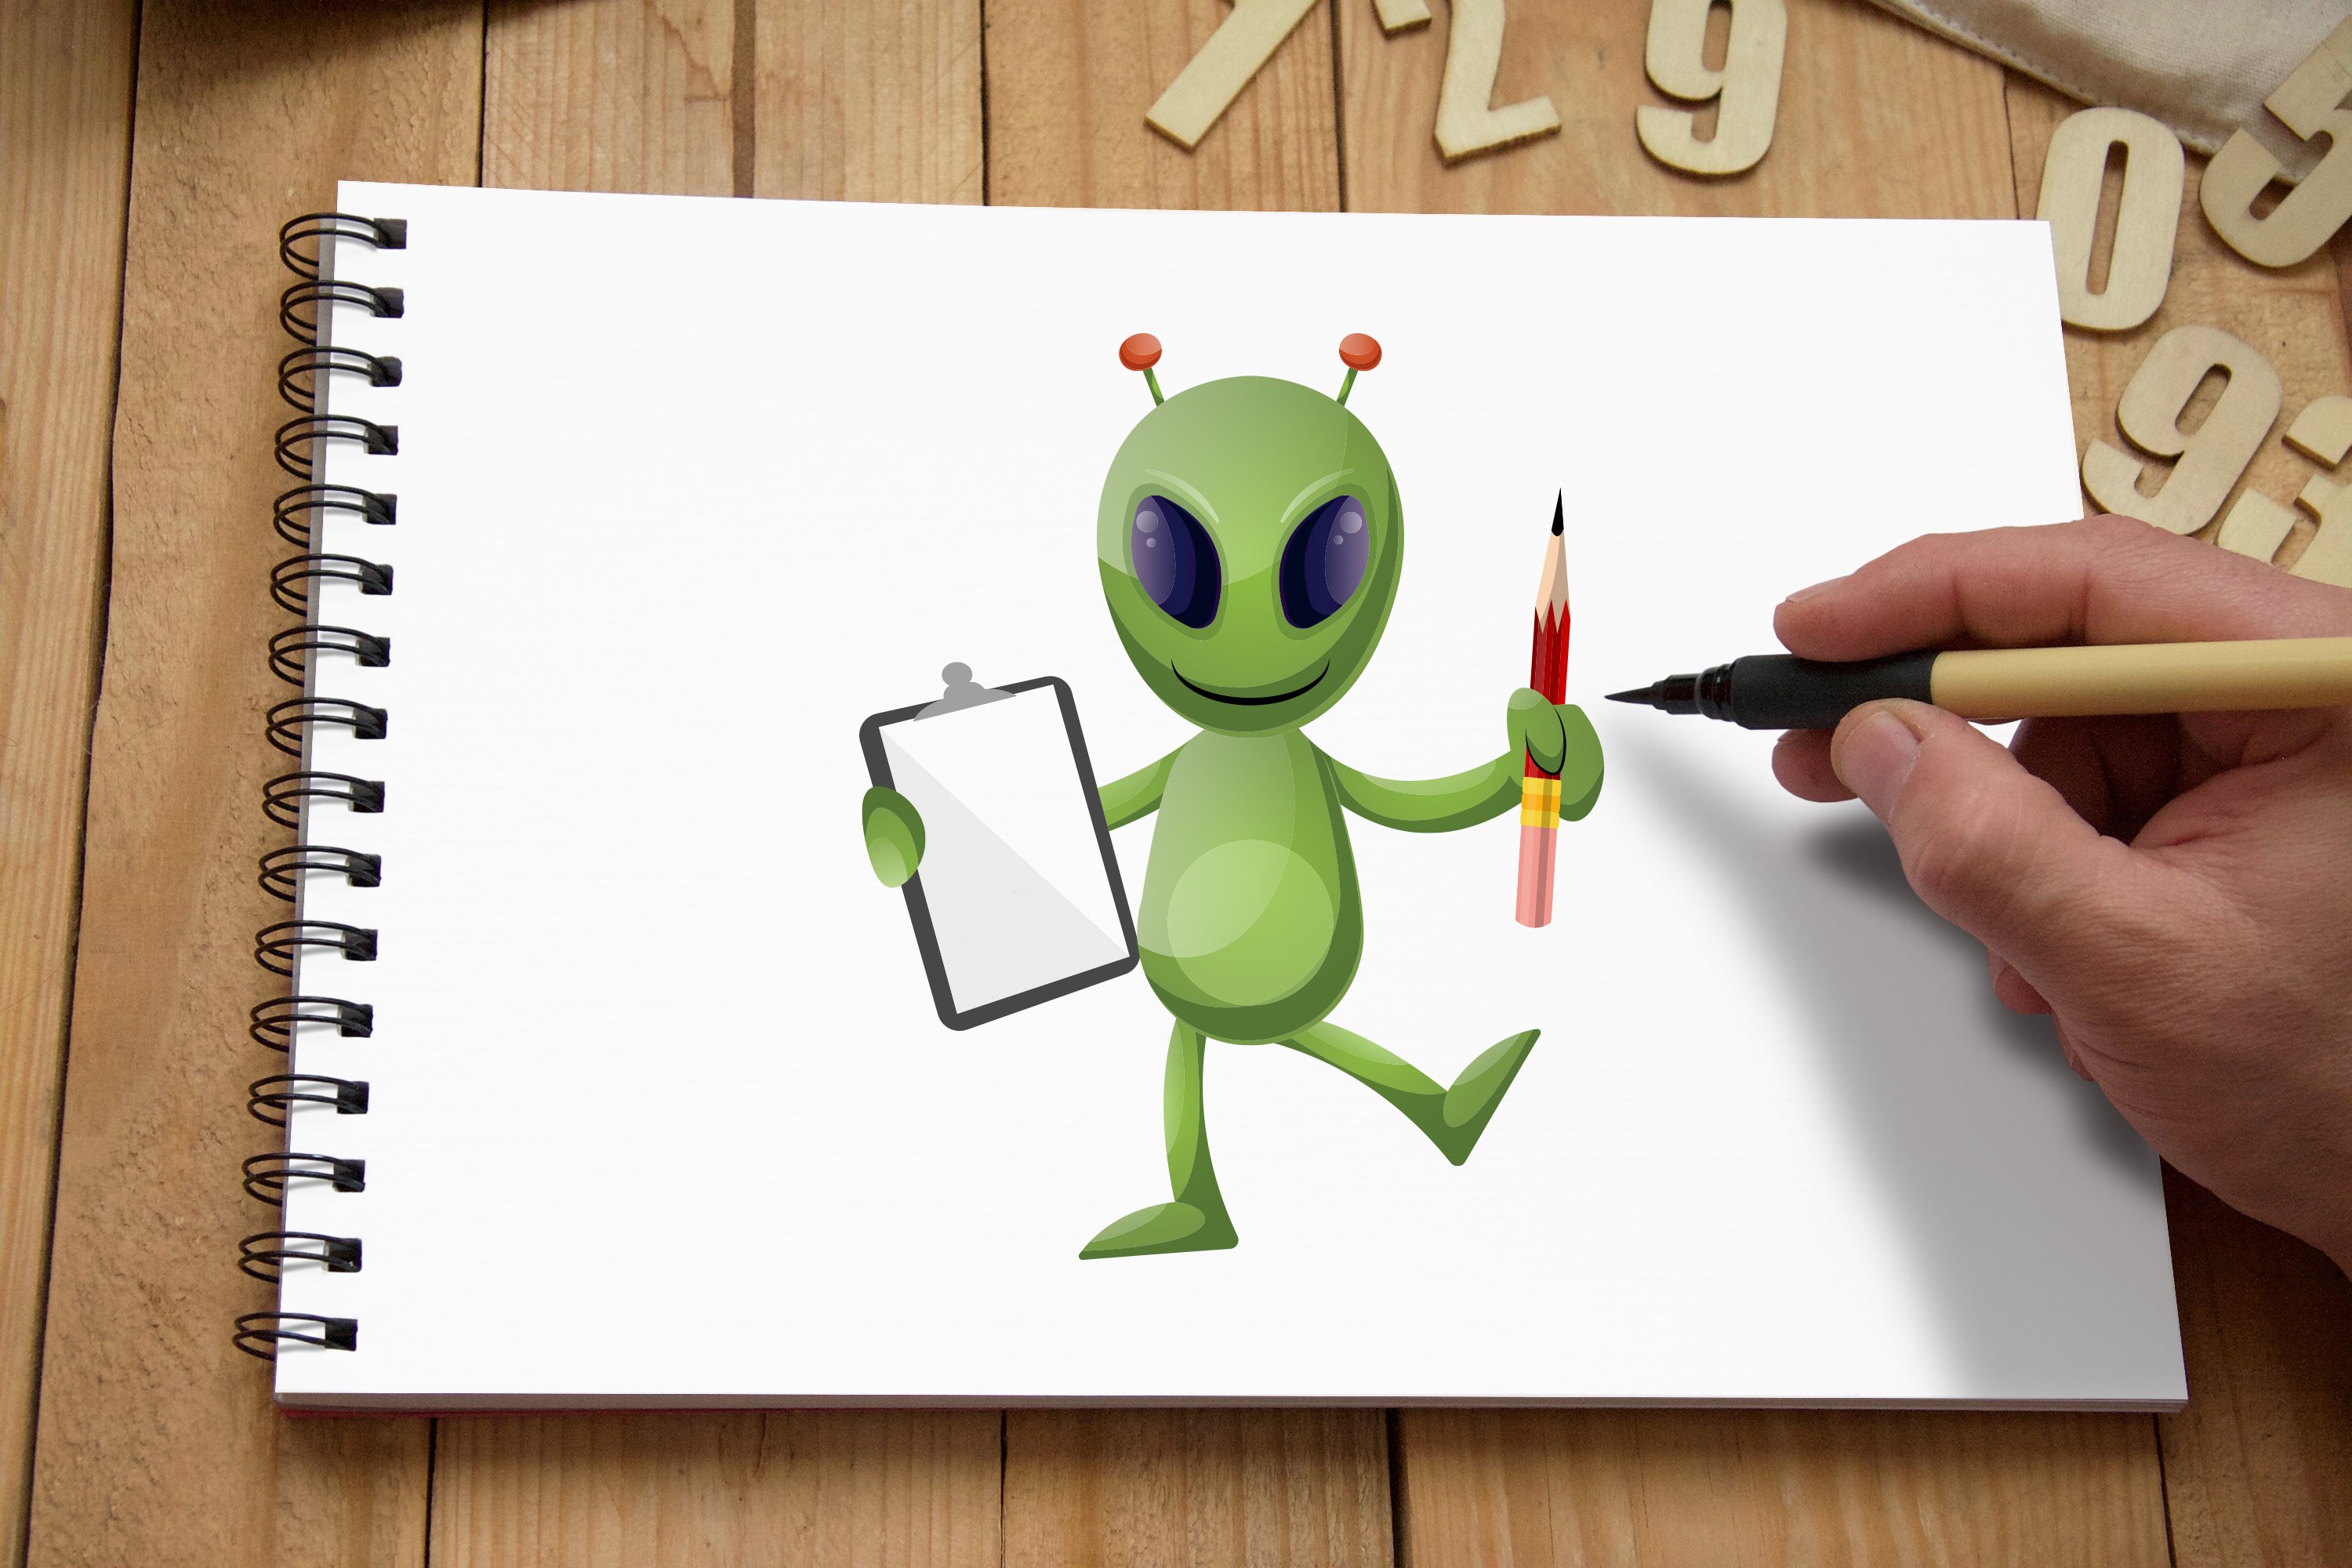 The image of a cheerful alien on the landscape sheet.